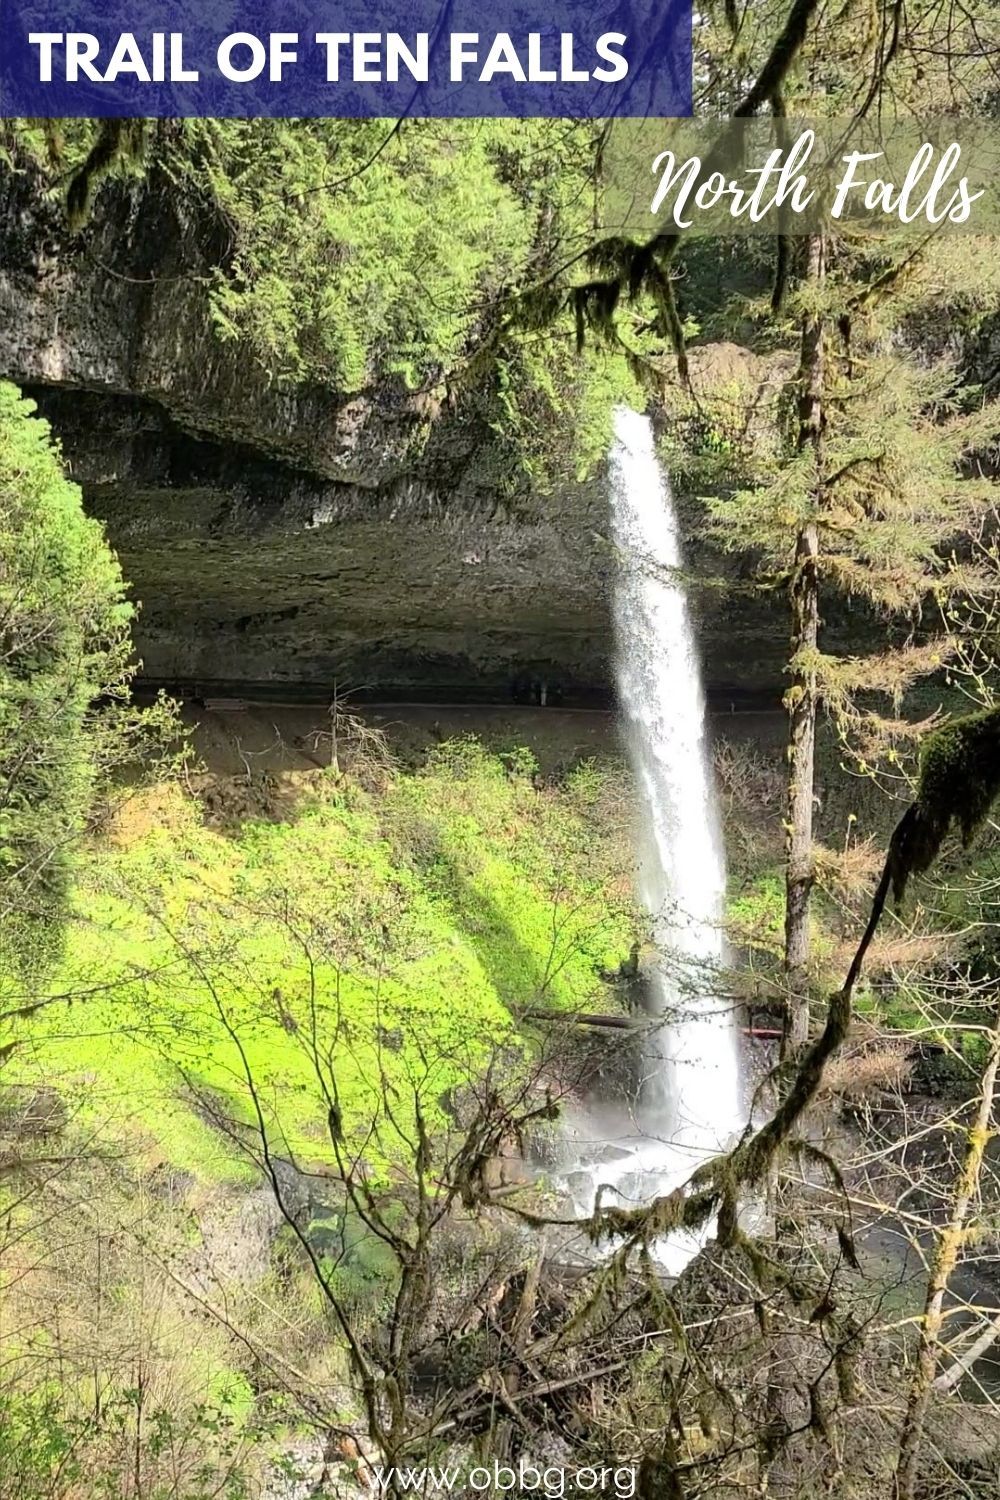 North Falls on the Trail of Ten falls in Silver Falls State Park